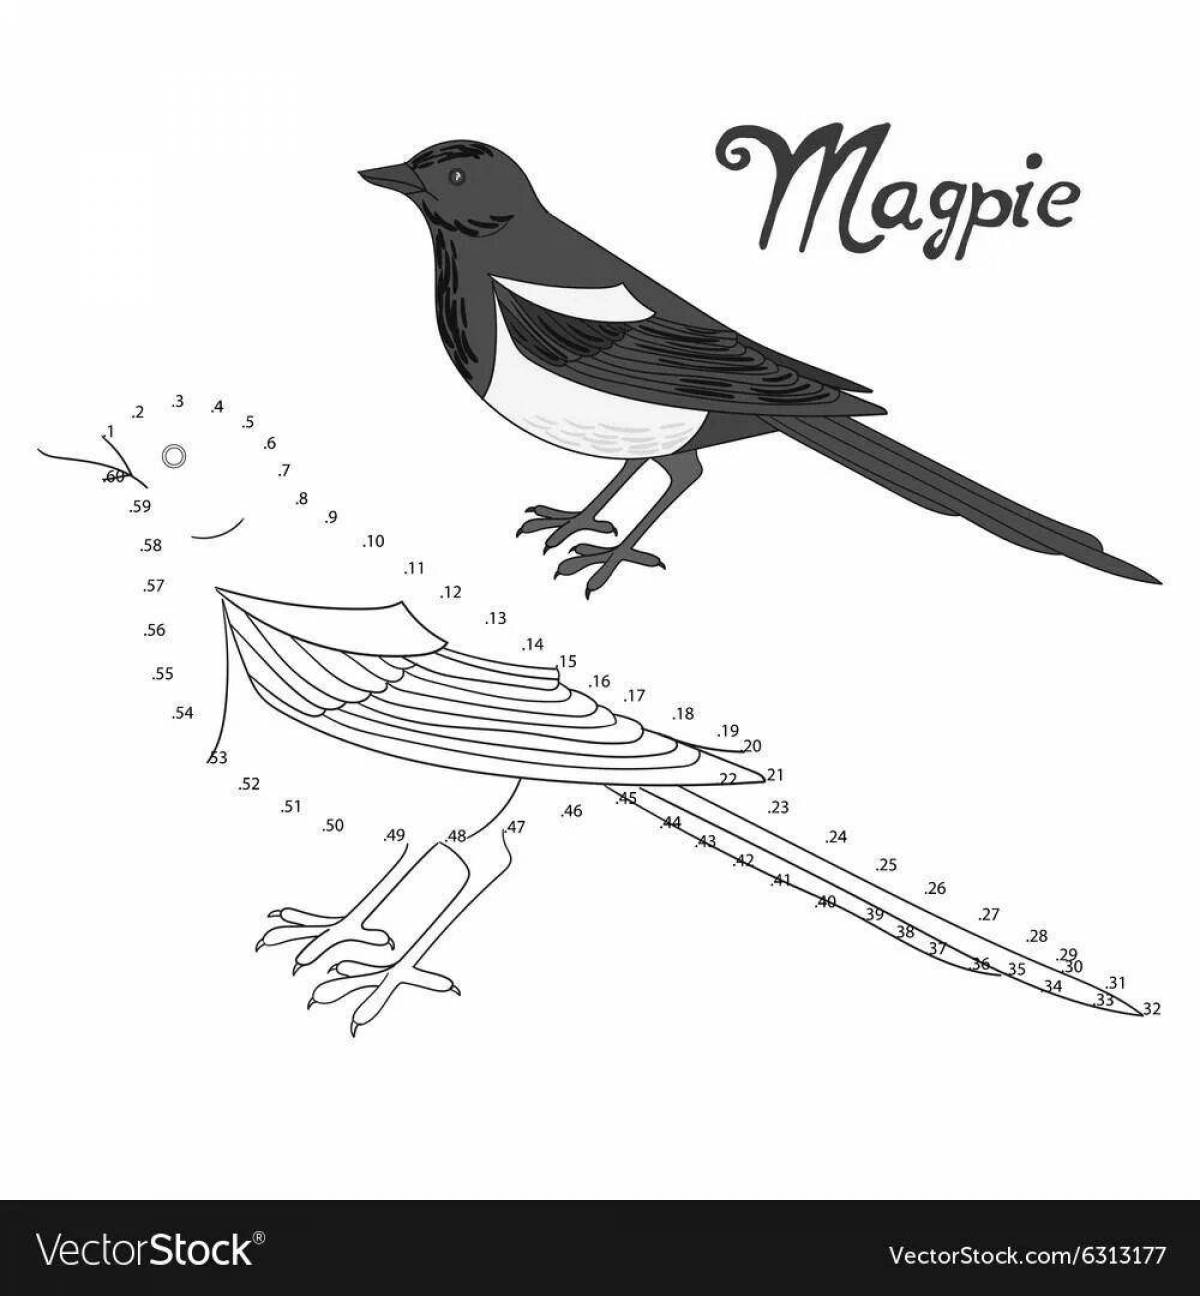 Coloring book charming magpie